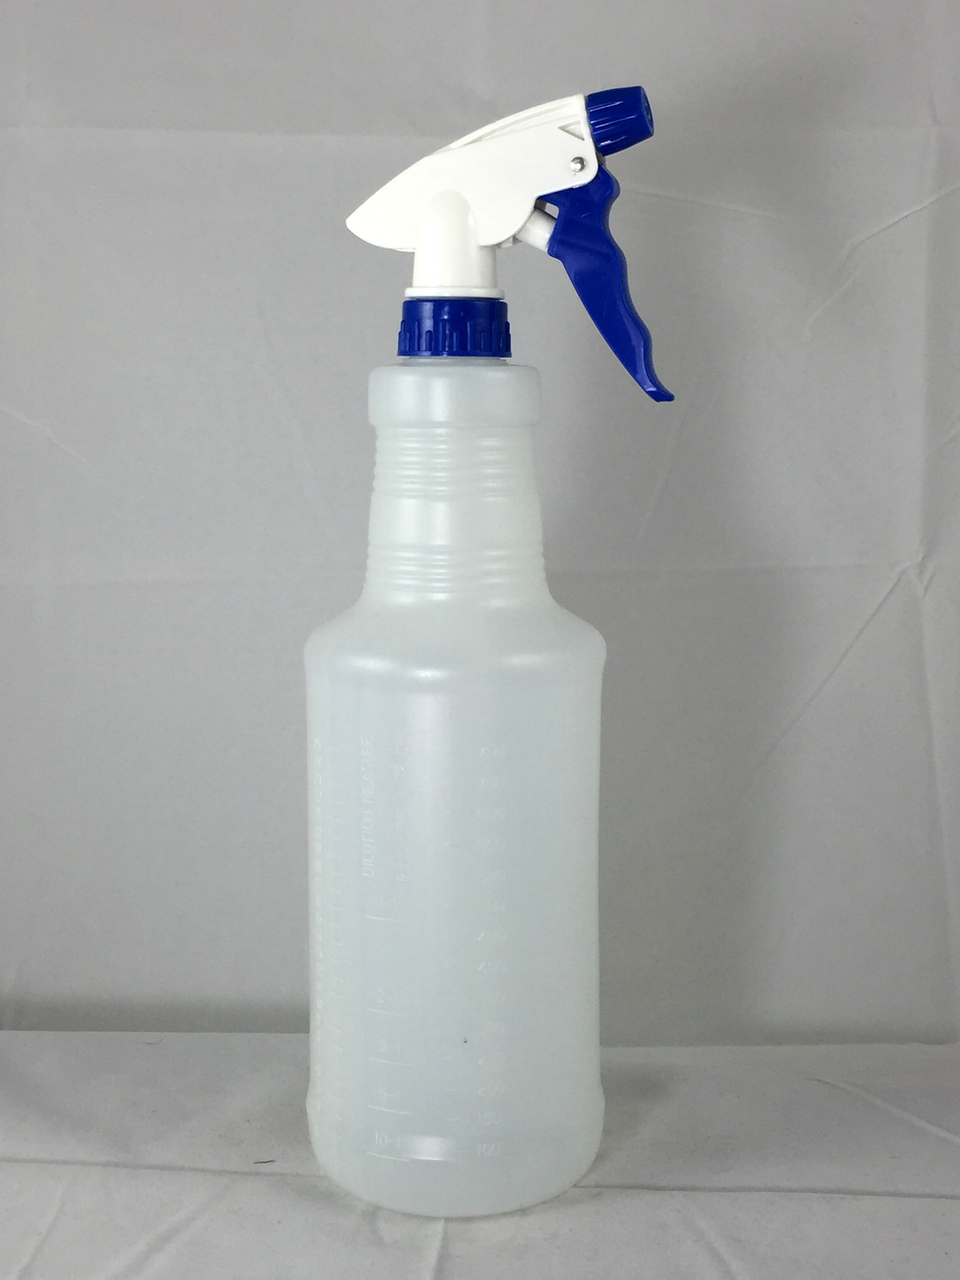 For a small area (eg. 12 sq feet) can you apply Kennel Concentrate Sealer with a small roller?